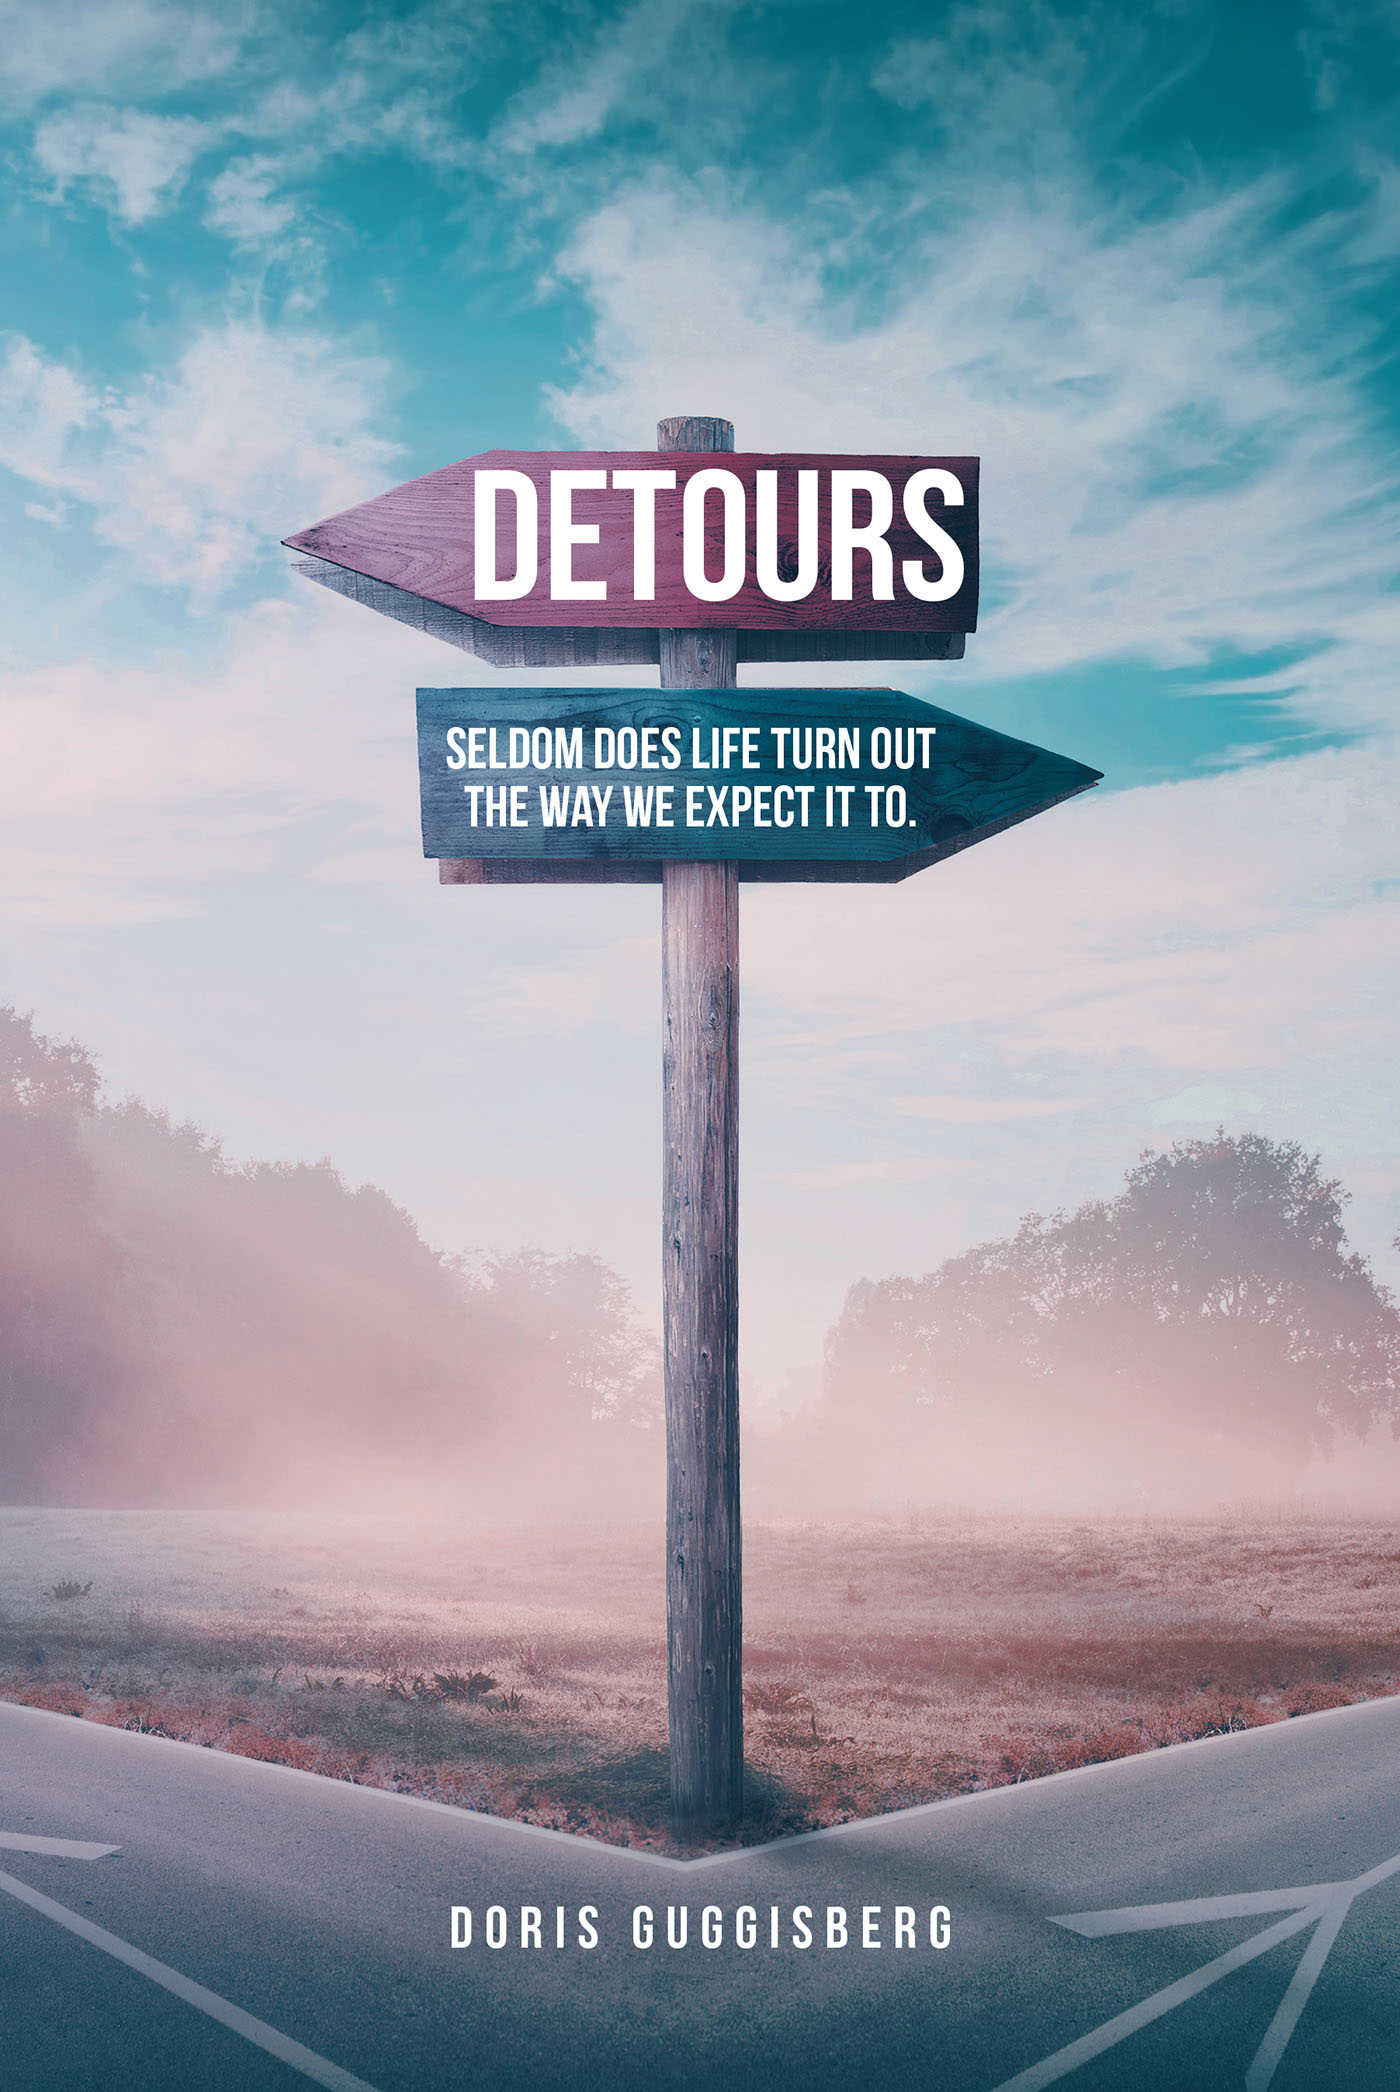 Doris Guggisberg’s Newly Released "Detours" is a Heartfelt Journey of Faith, Love, and Unexpected Blessings in a Modern Christian Romance